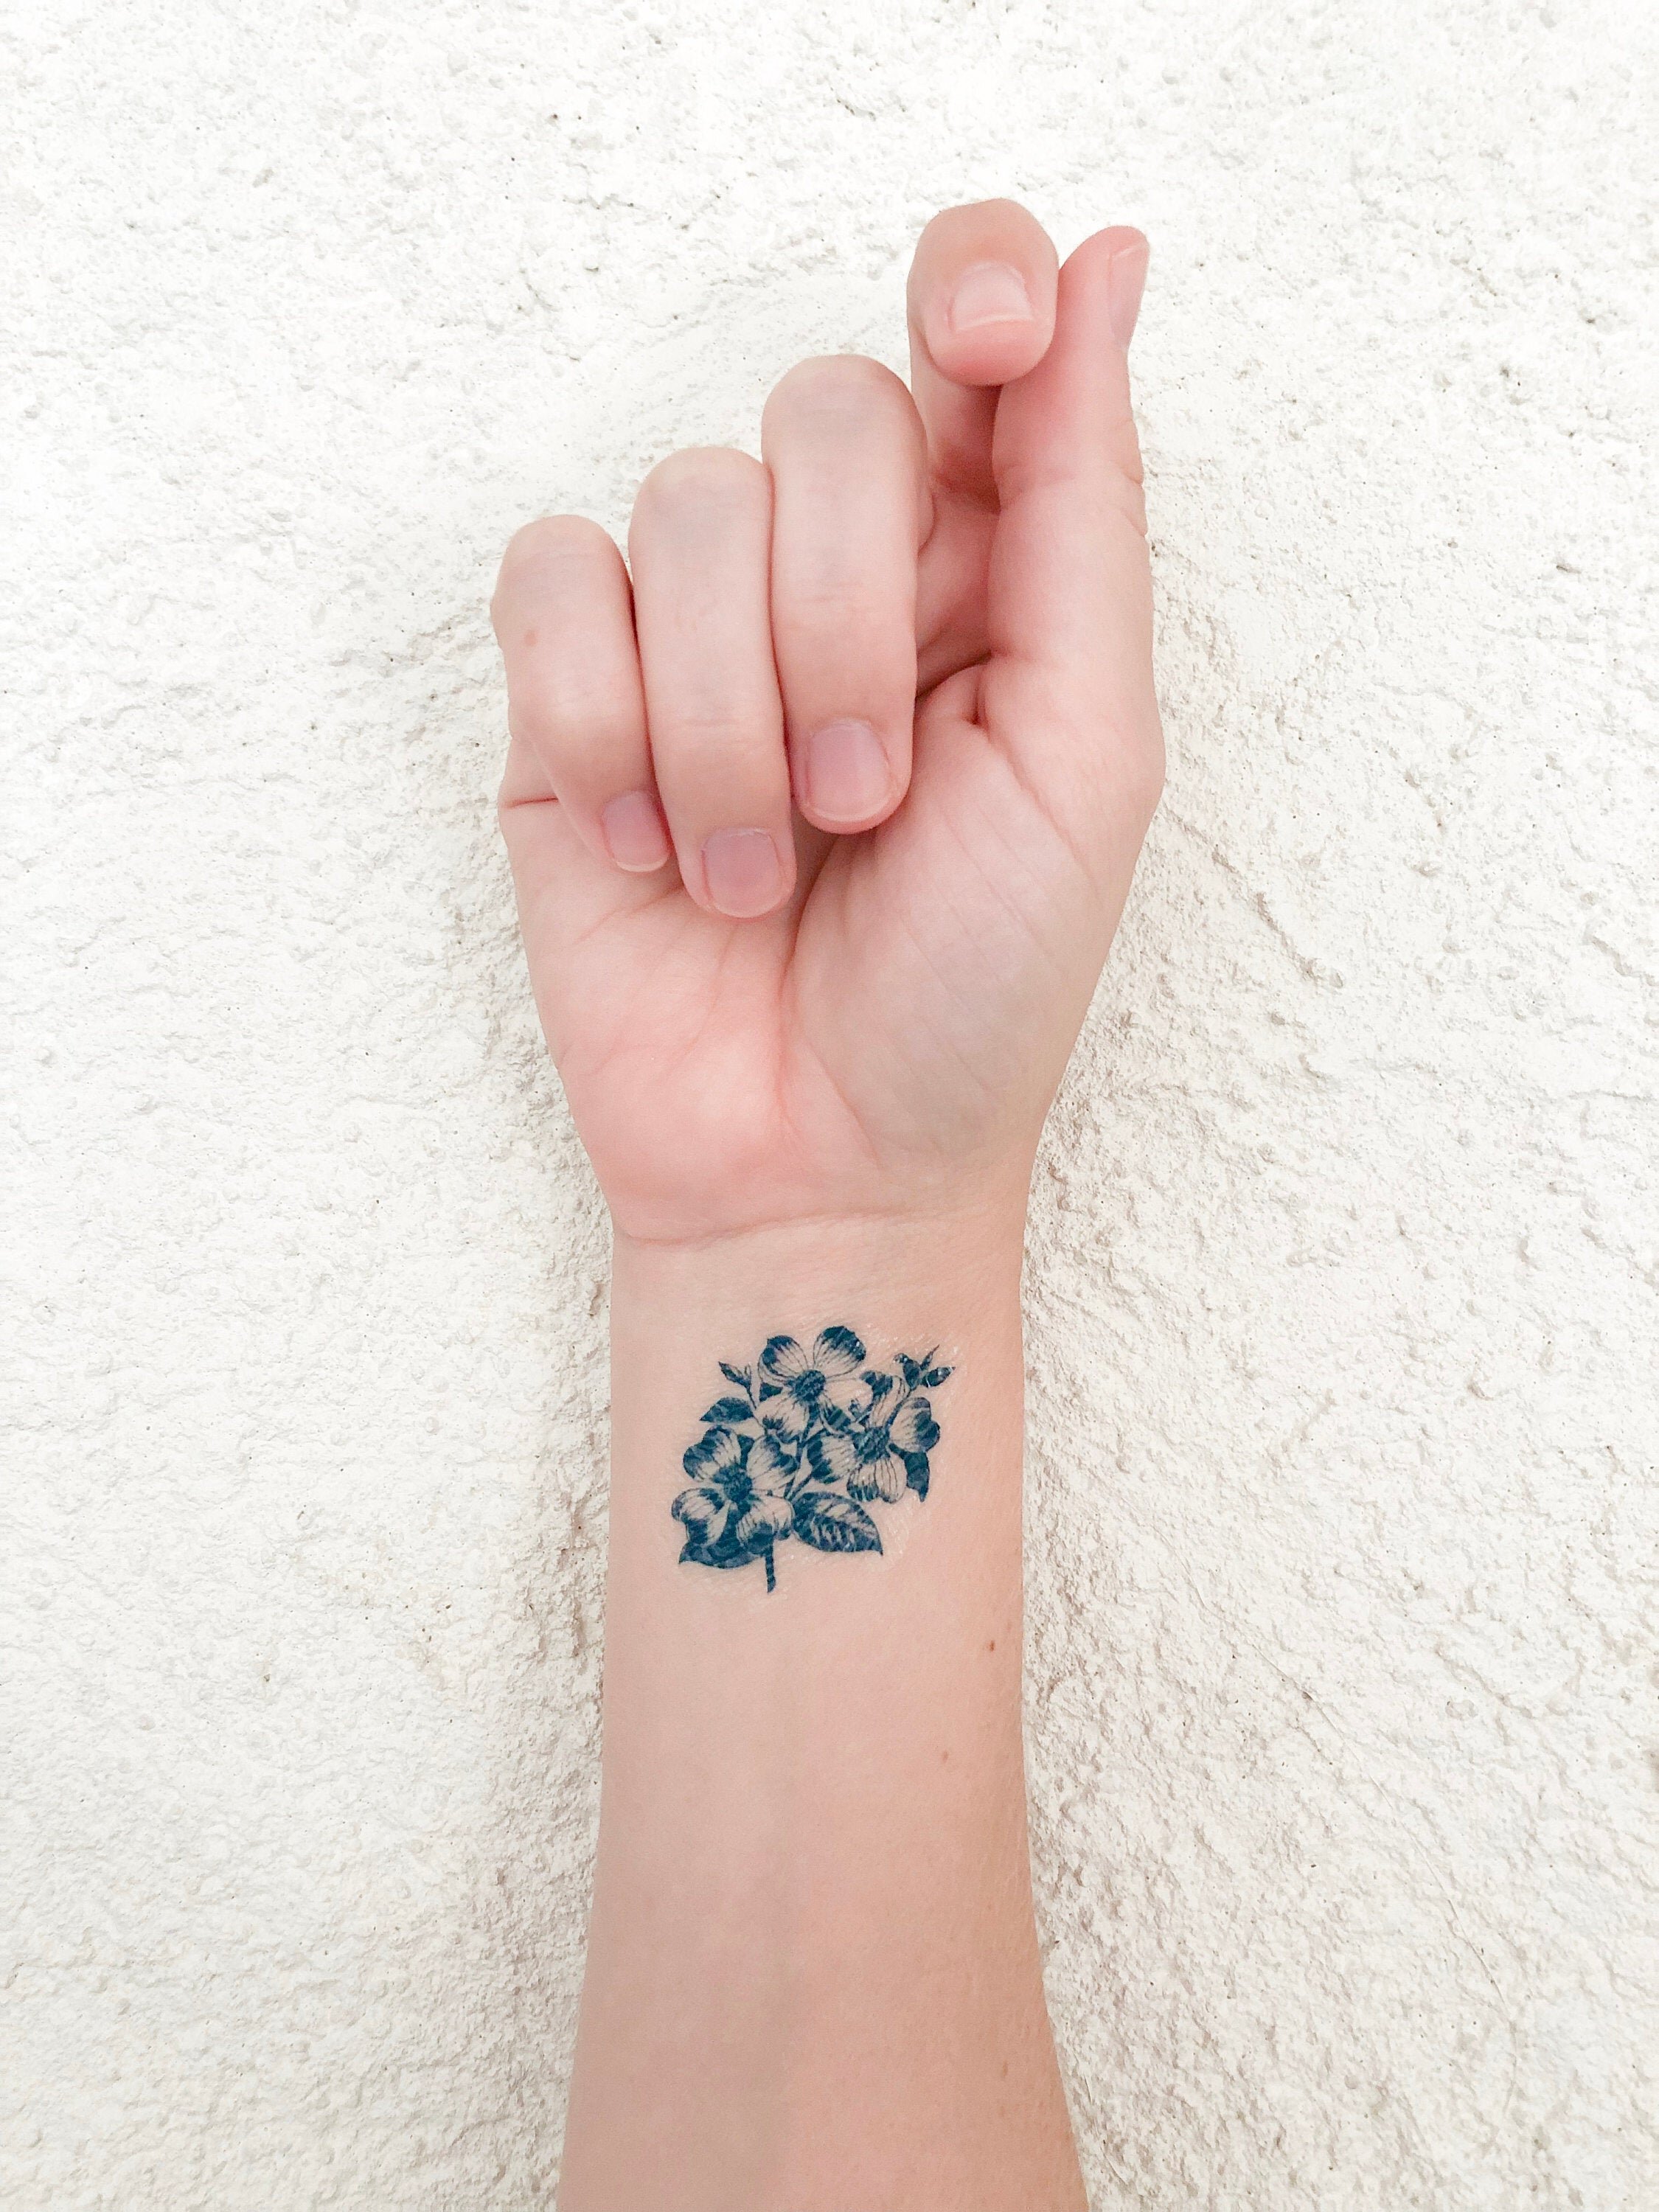 57 February Birth Flower Tattoo Designs To Show Your Happiness